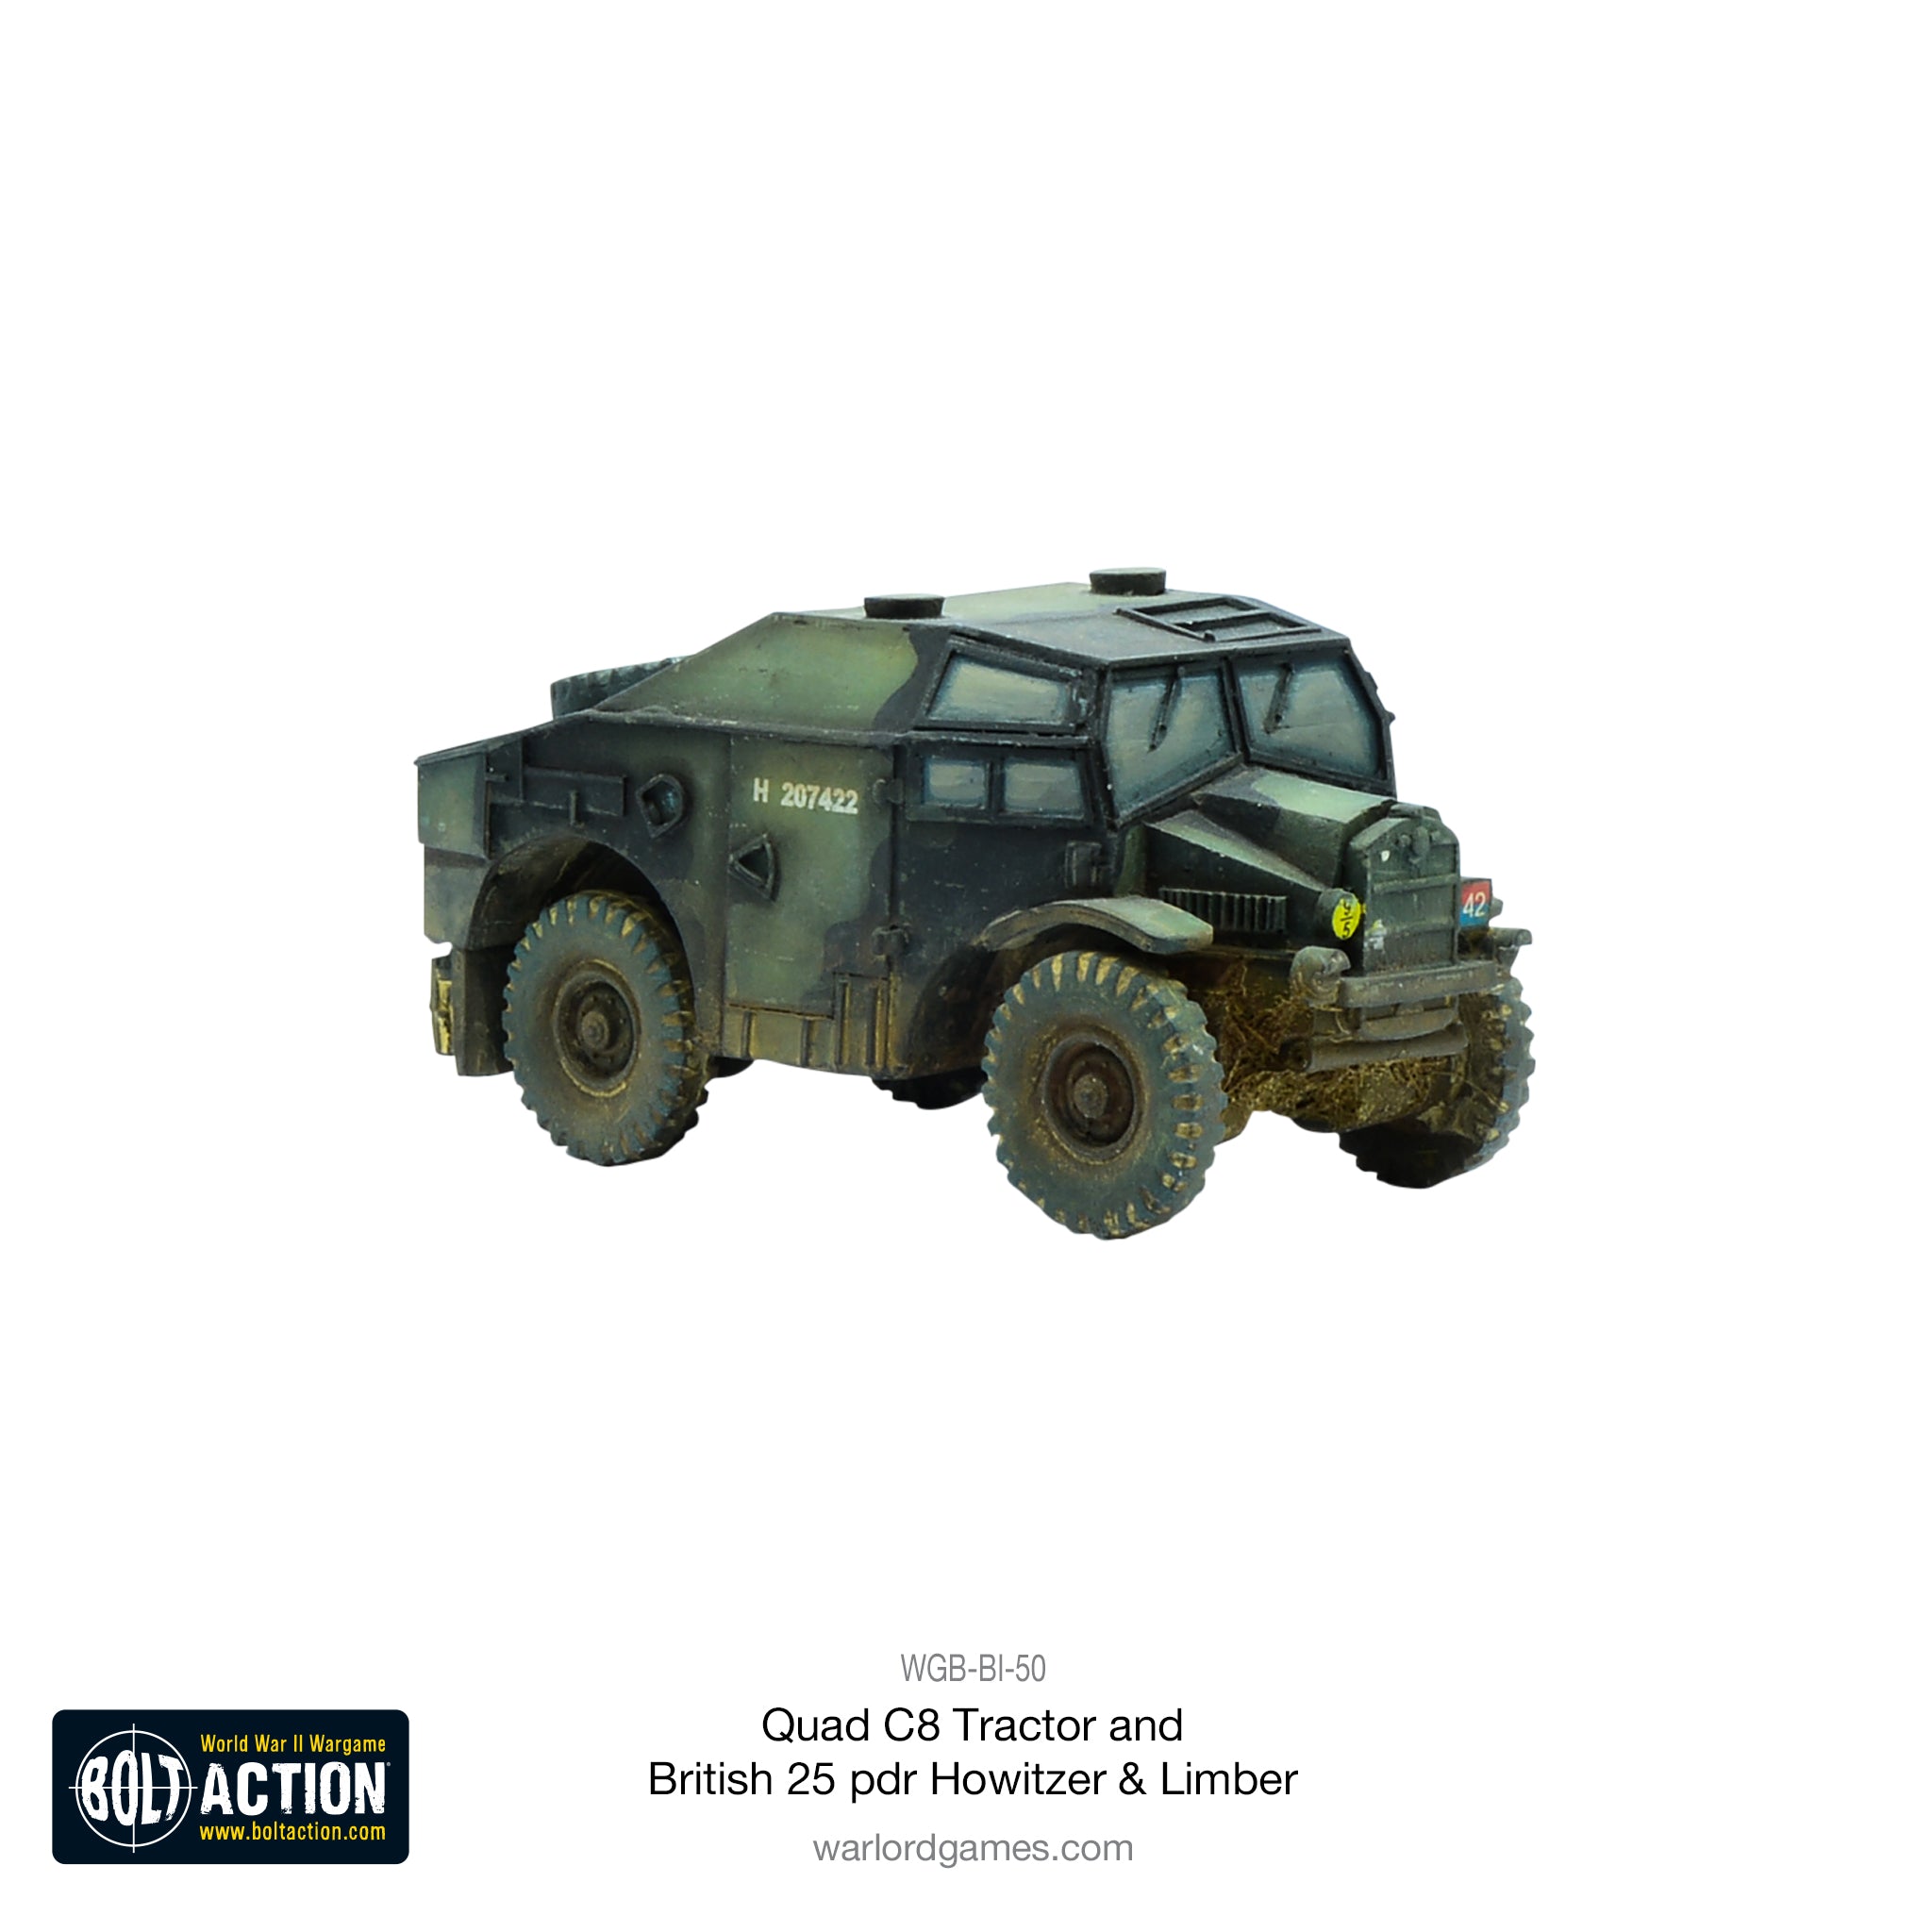 Quad C8 Tractor and British 25 pdr Howitzer & Limber